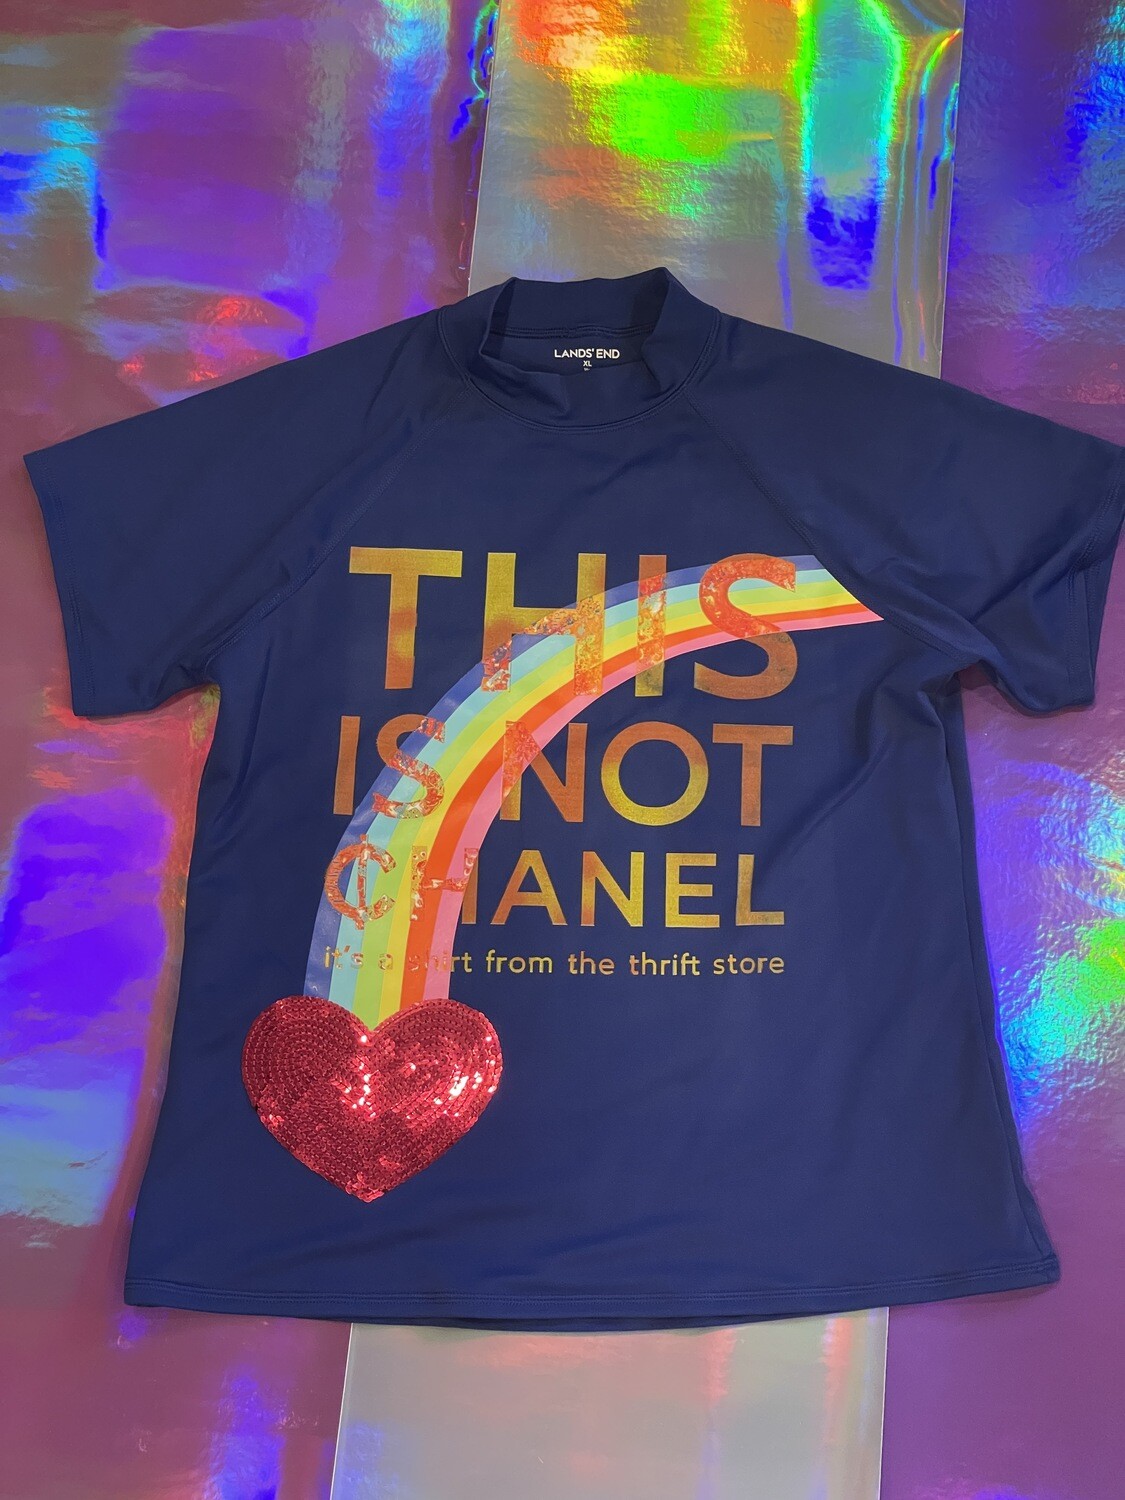 This Is Not ¢hanel - NFC clothing - Rainbow Blue Child XL